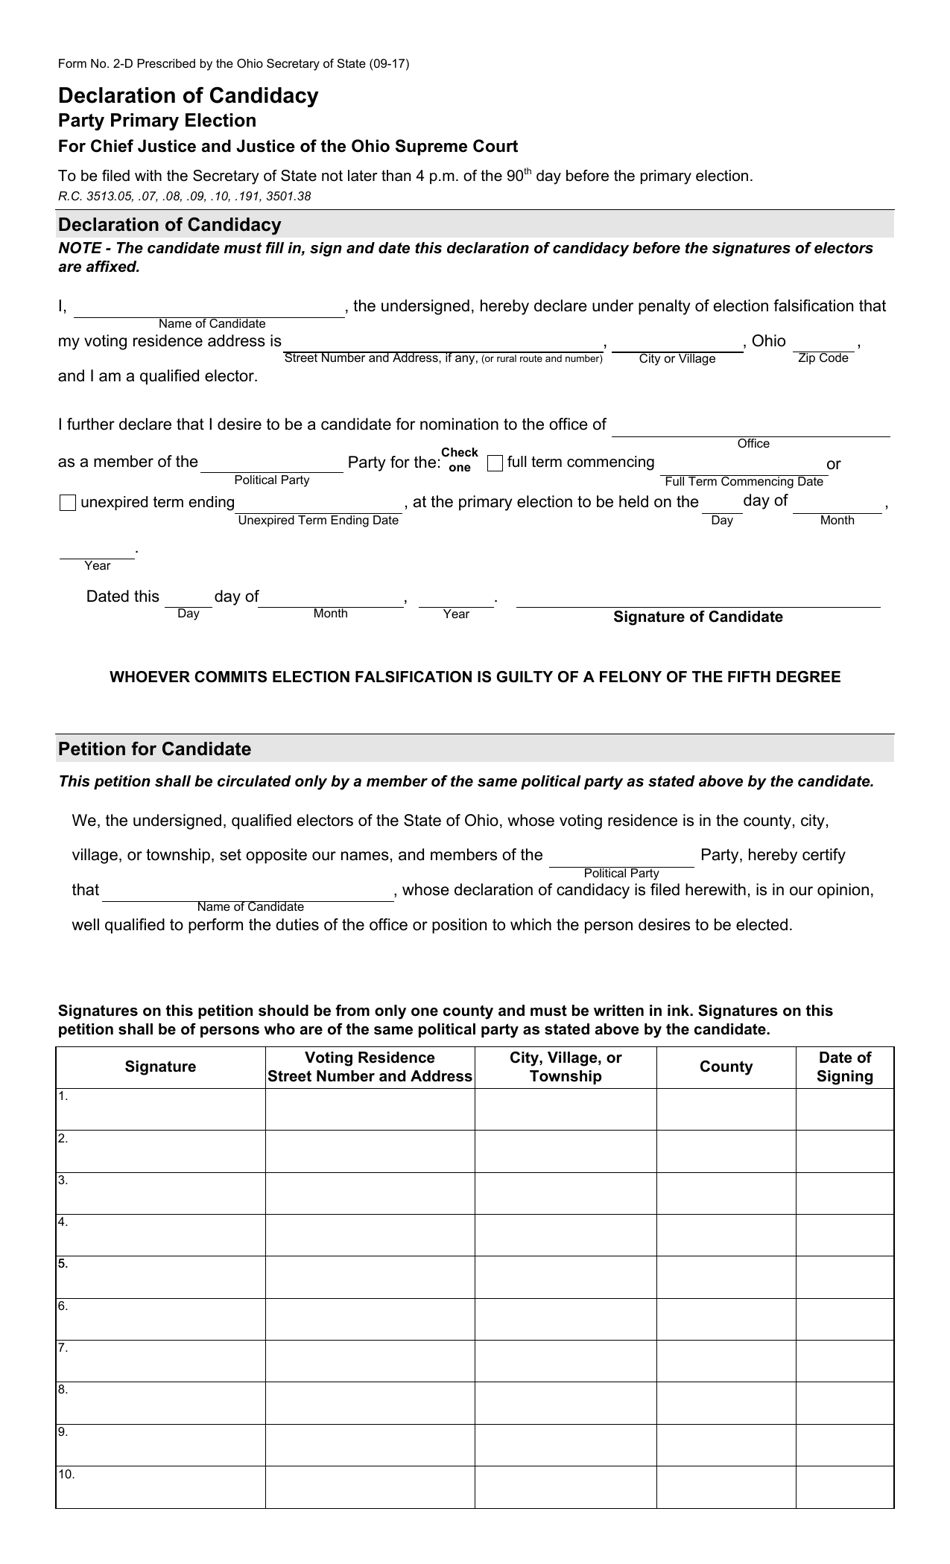 Form 2-D Declaration of Candidacy - Party Primary Election for Chief Justice and Justice of the Ohio Supreme Court - Ohio, Page 1